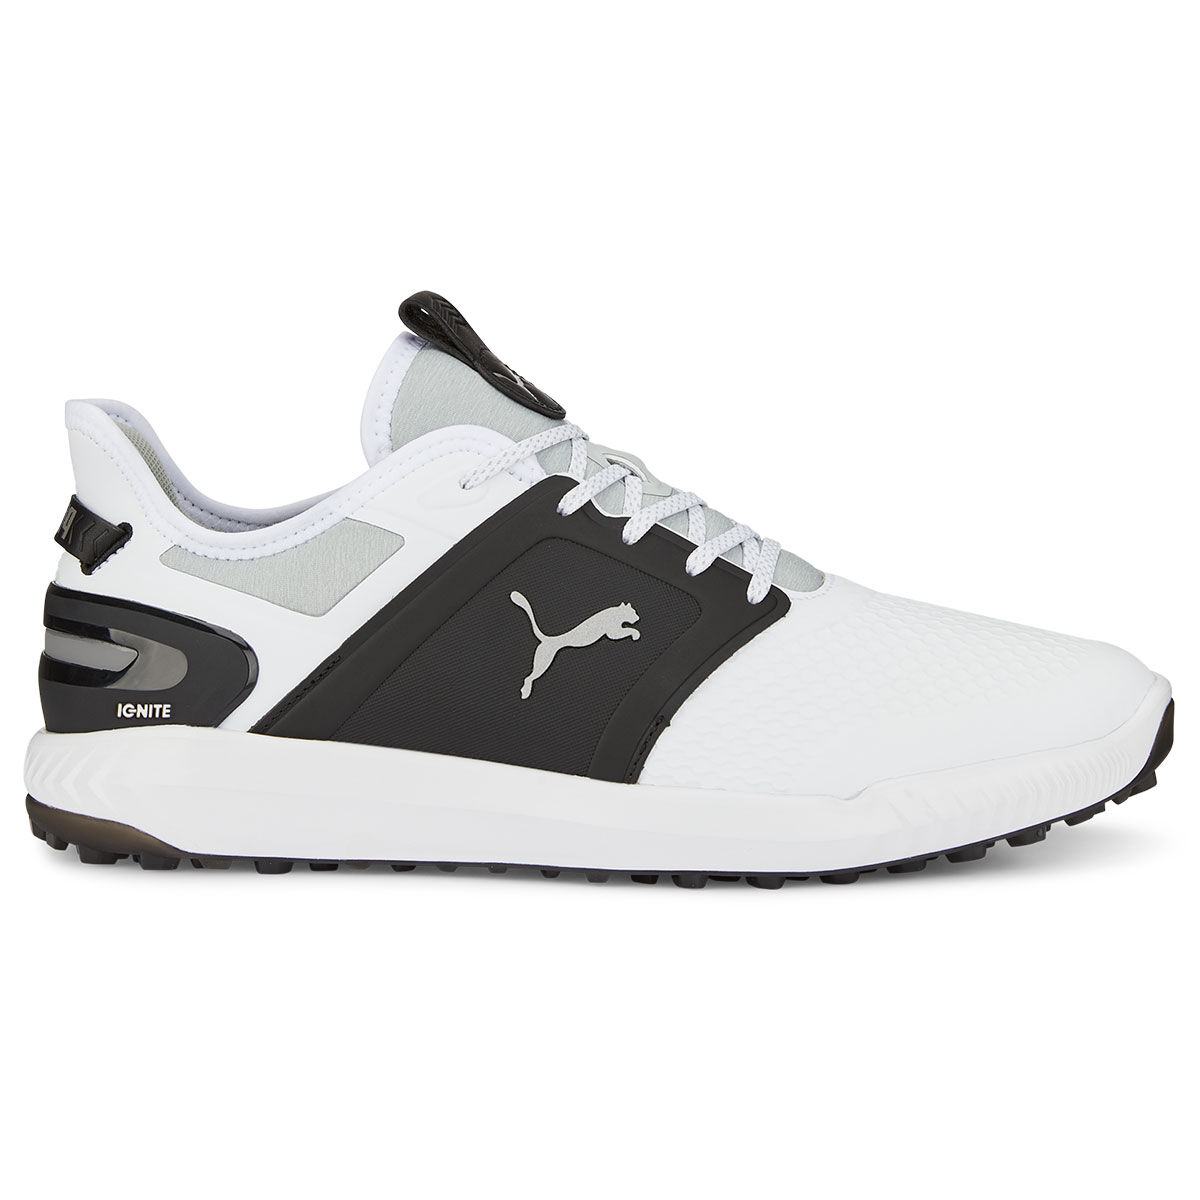 PUMA Golf Men’s White, Black and Silver IGNITE ELEVATE Waterproof Spikeless Golf Shoes, Size: 7 | American Golf